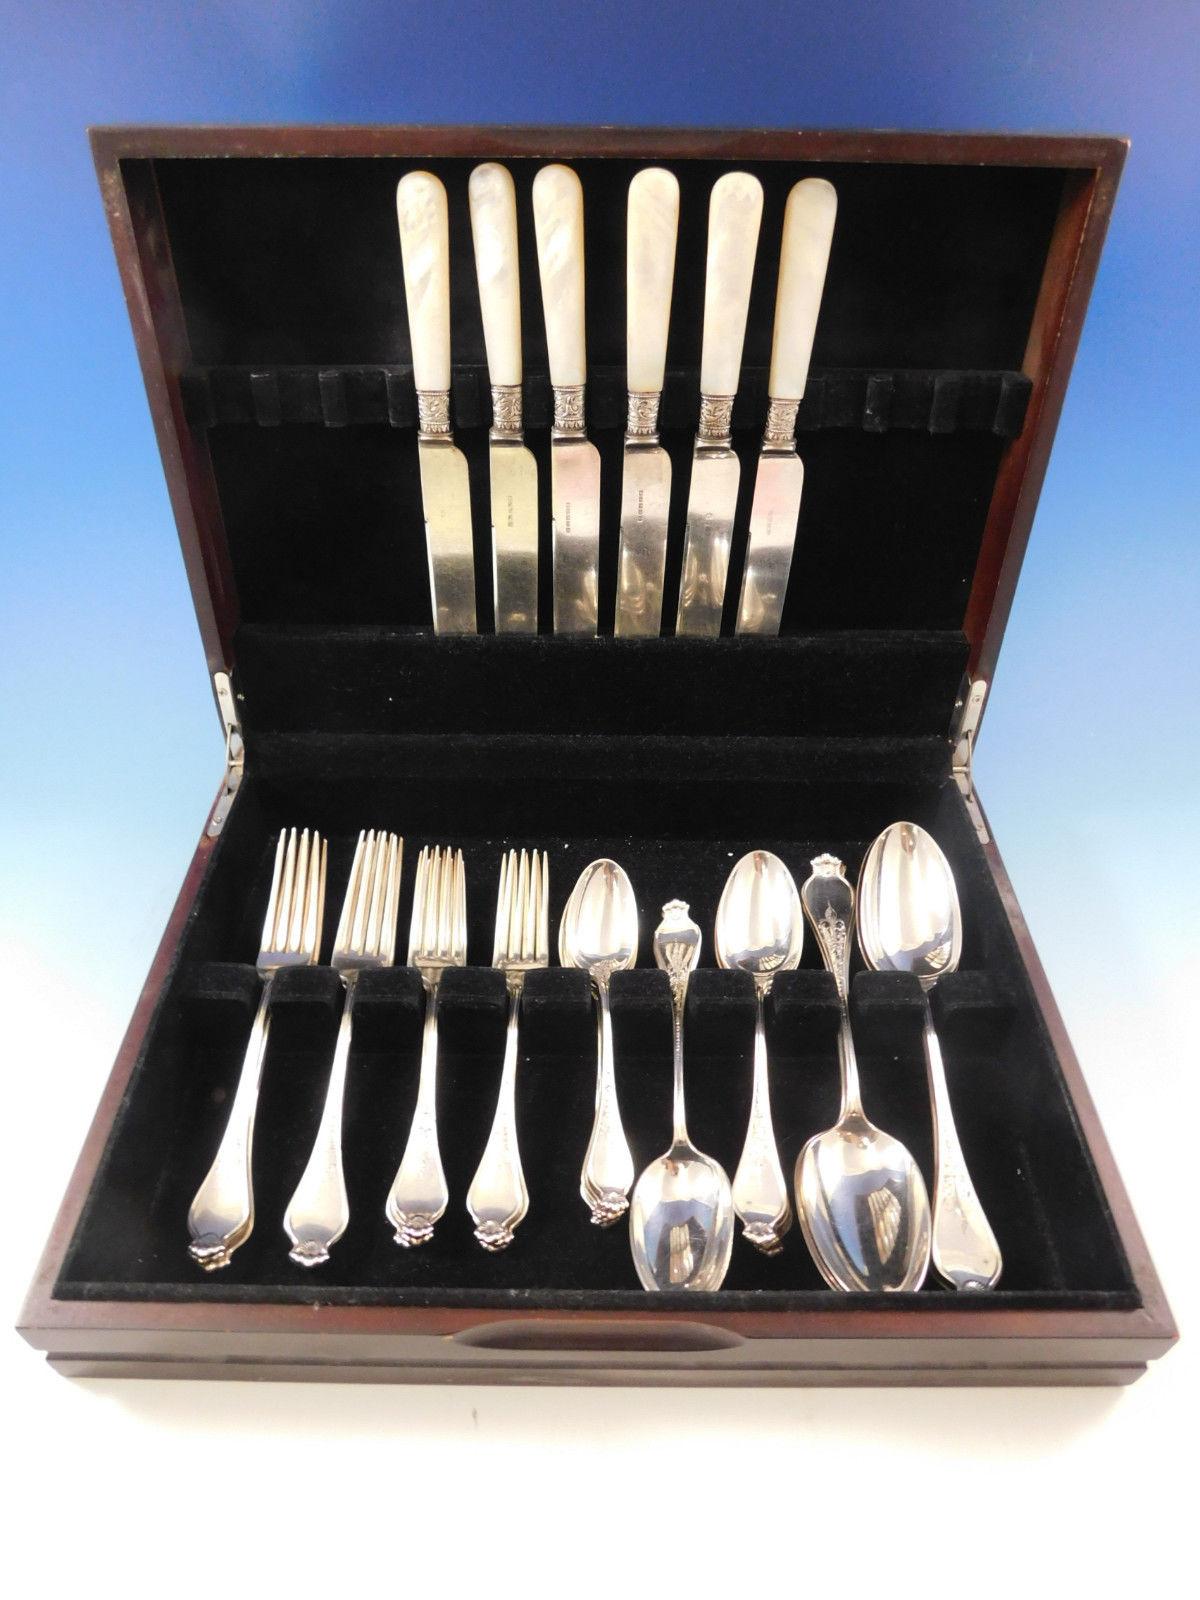 Rare Corona by Dominick & Haff, circa 1885 sterling silver flatware set with shell motif and engraved detailing, 36 pieces. This scarce early set includes:

6 dinner size knives, 9 3/4